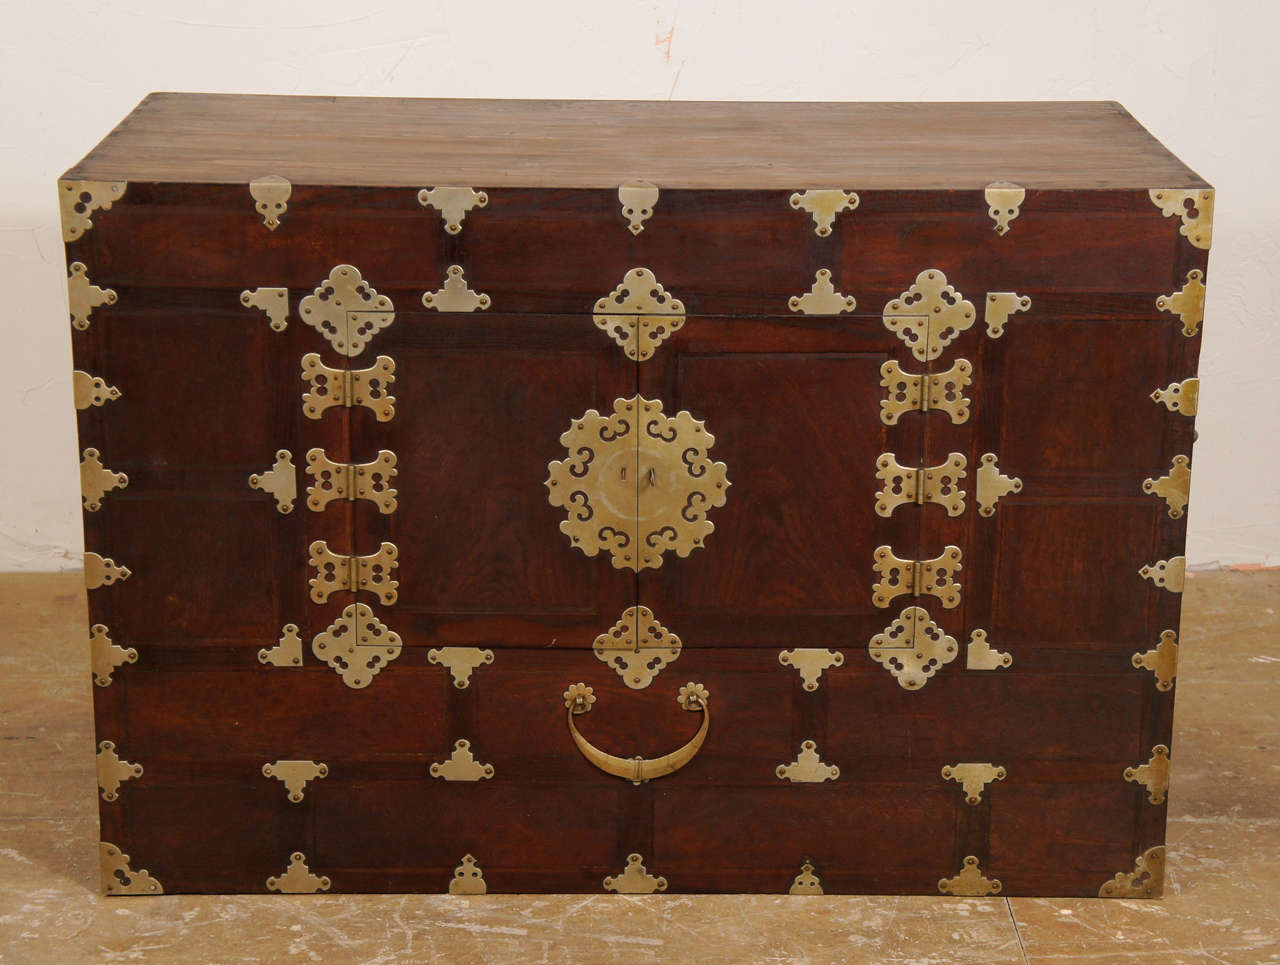 Elegant Chinese chest with decorative brass hinges, handle and iron carrying handles.  Lightweight wood/partially tongue and groove.  Small double center doors (partly missing latch) lead to one large interior lined in paper -- no shelves -- great